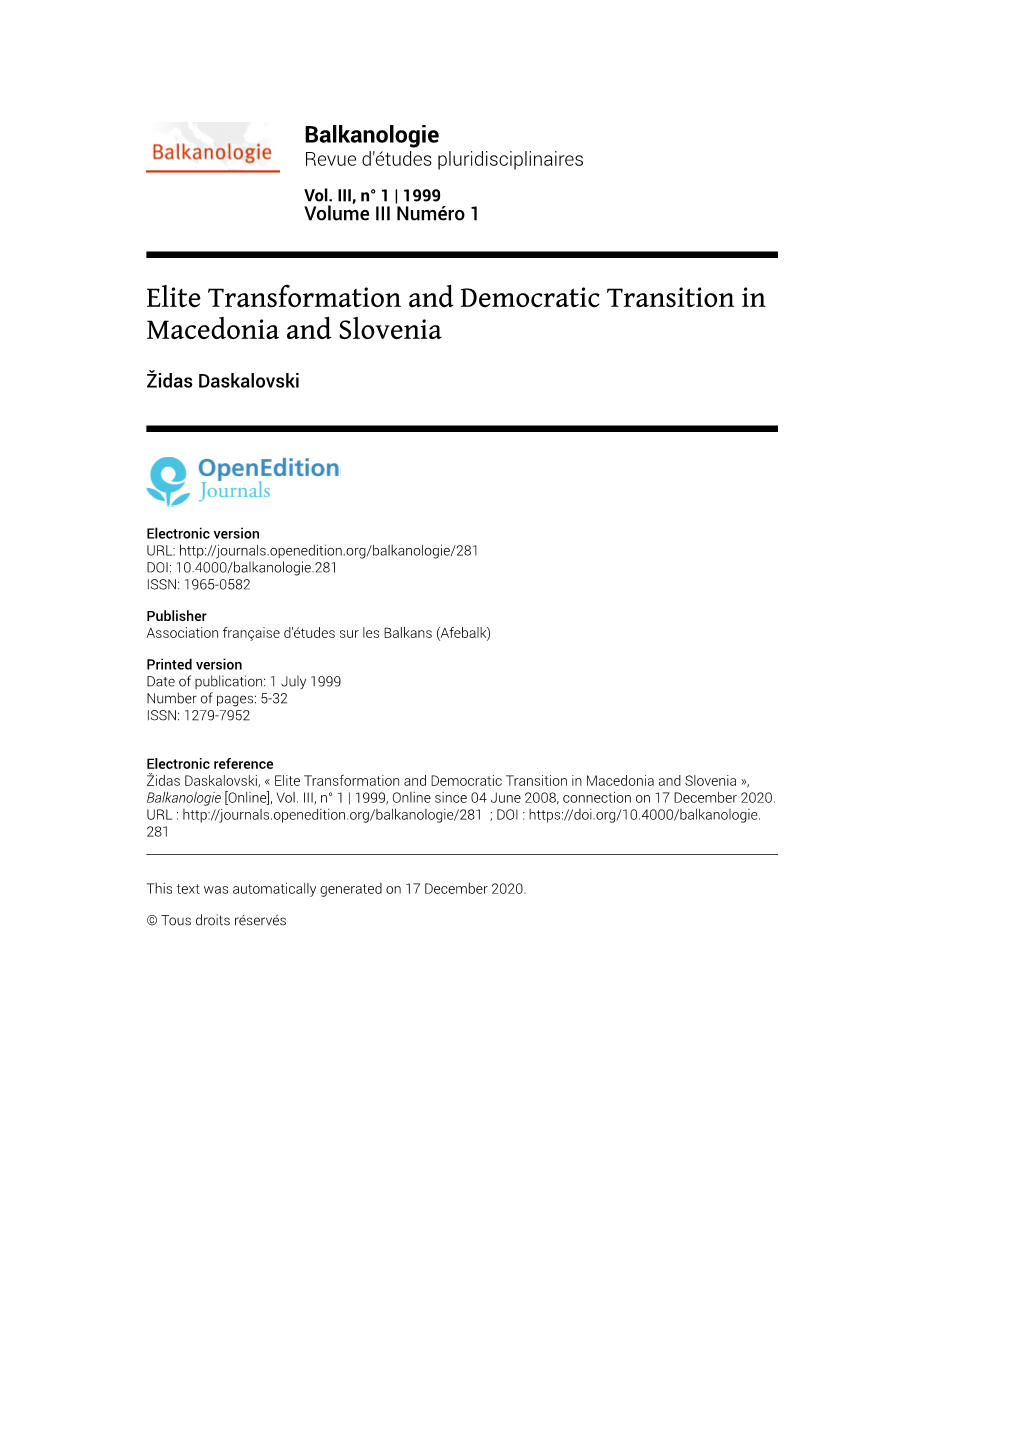 Balkanologie, Vol. III, N° 1 | 1999 Elite Transformation and Democratic Transition in Macedonia and Slovenia 2